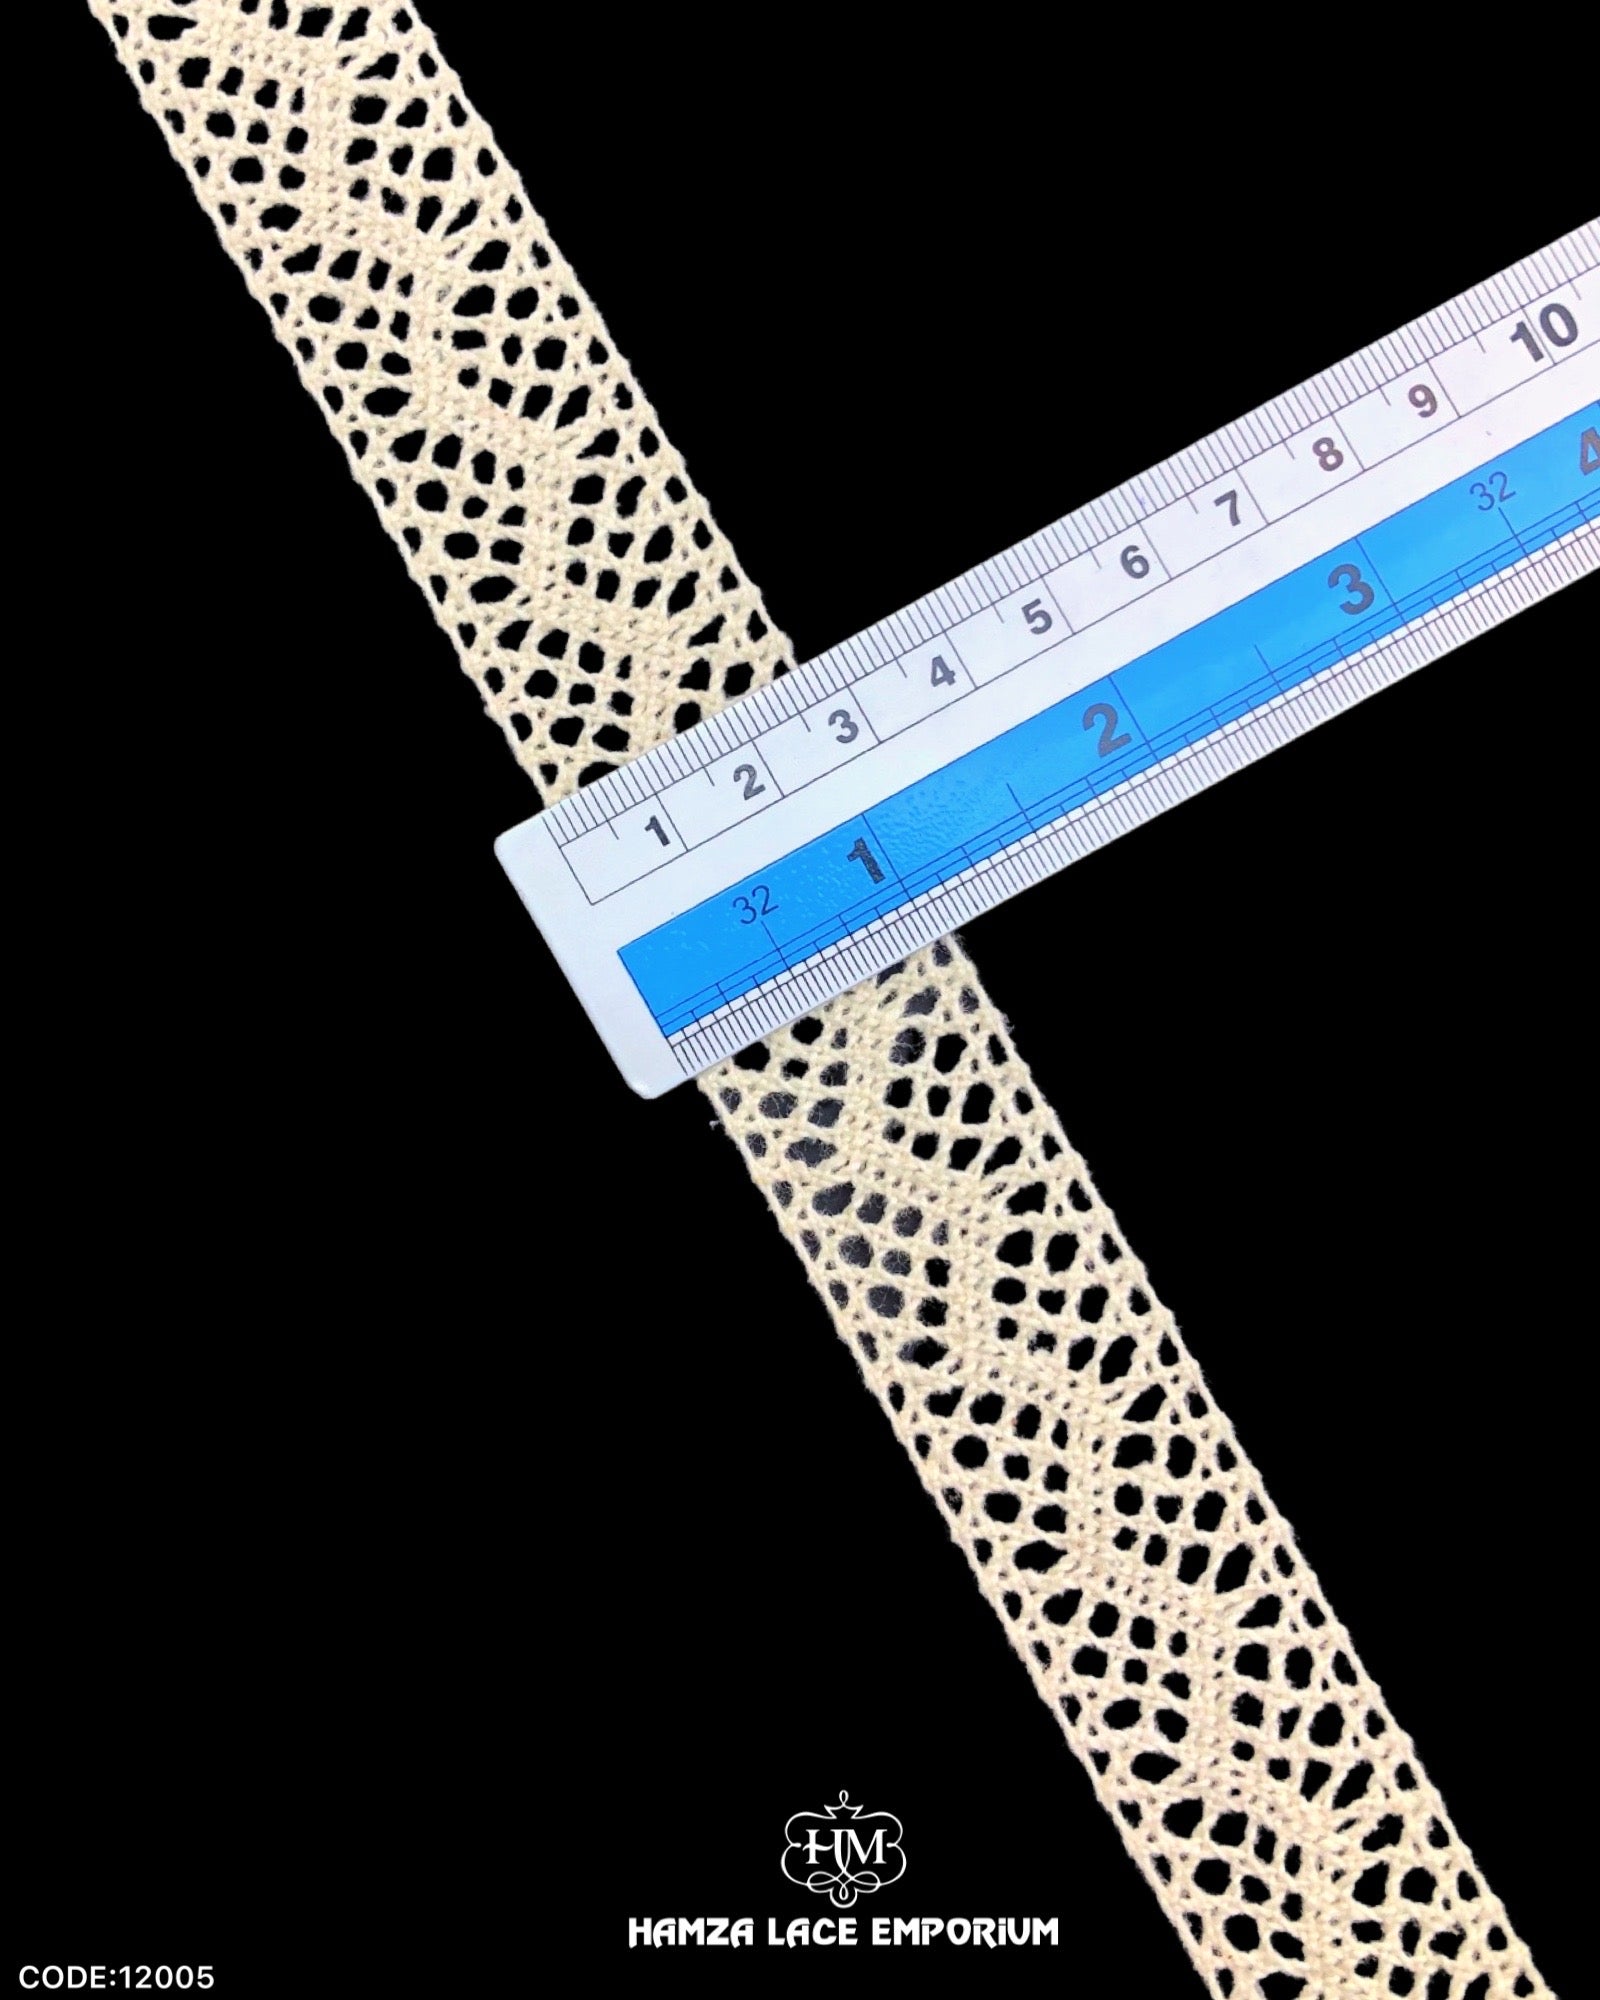 Size of the 'Center Filling Crochet Ladder Lace 04305' is shown with the help of a ruler as '1.5' inches